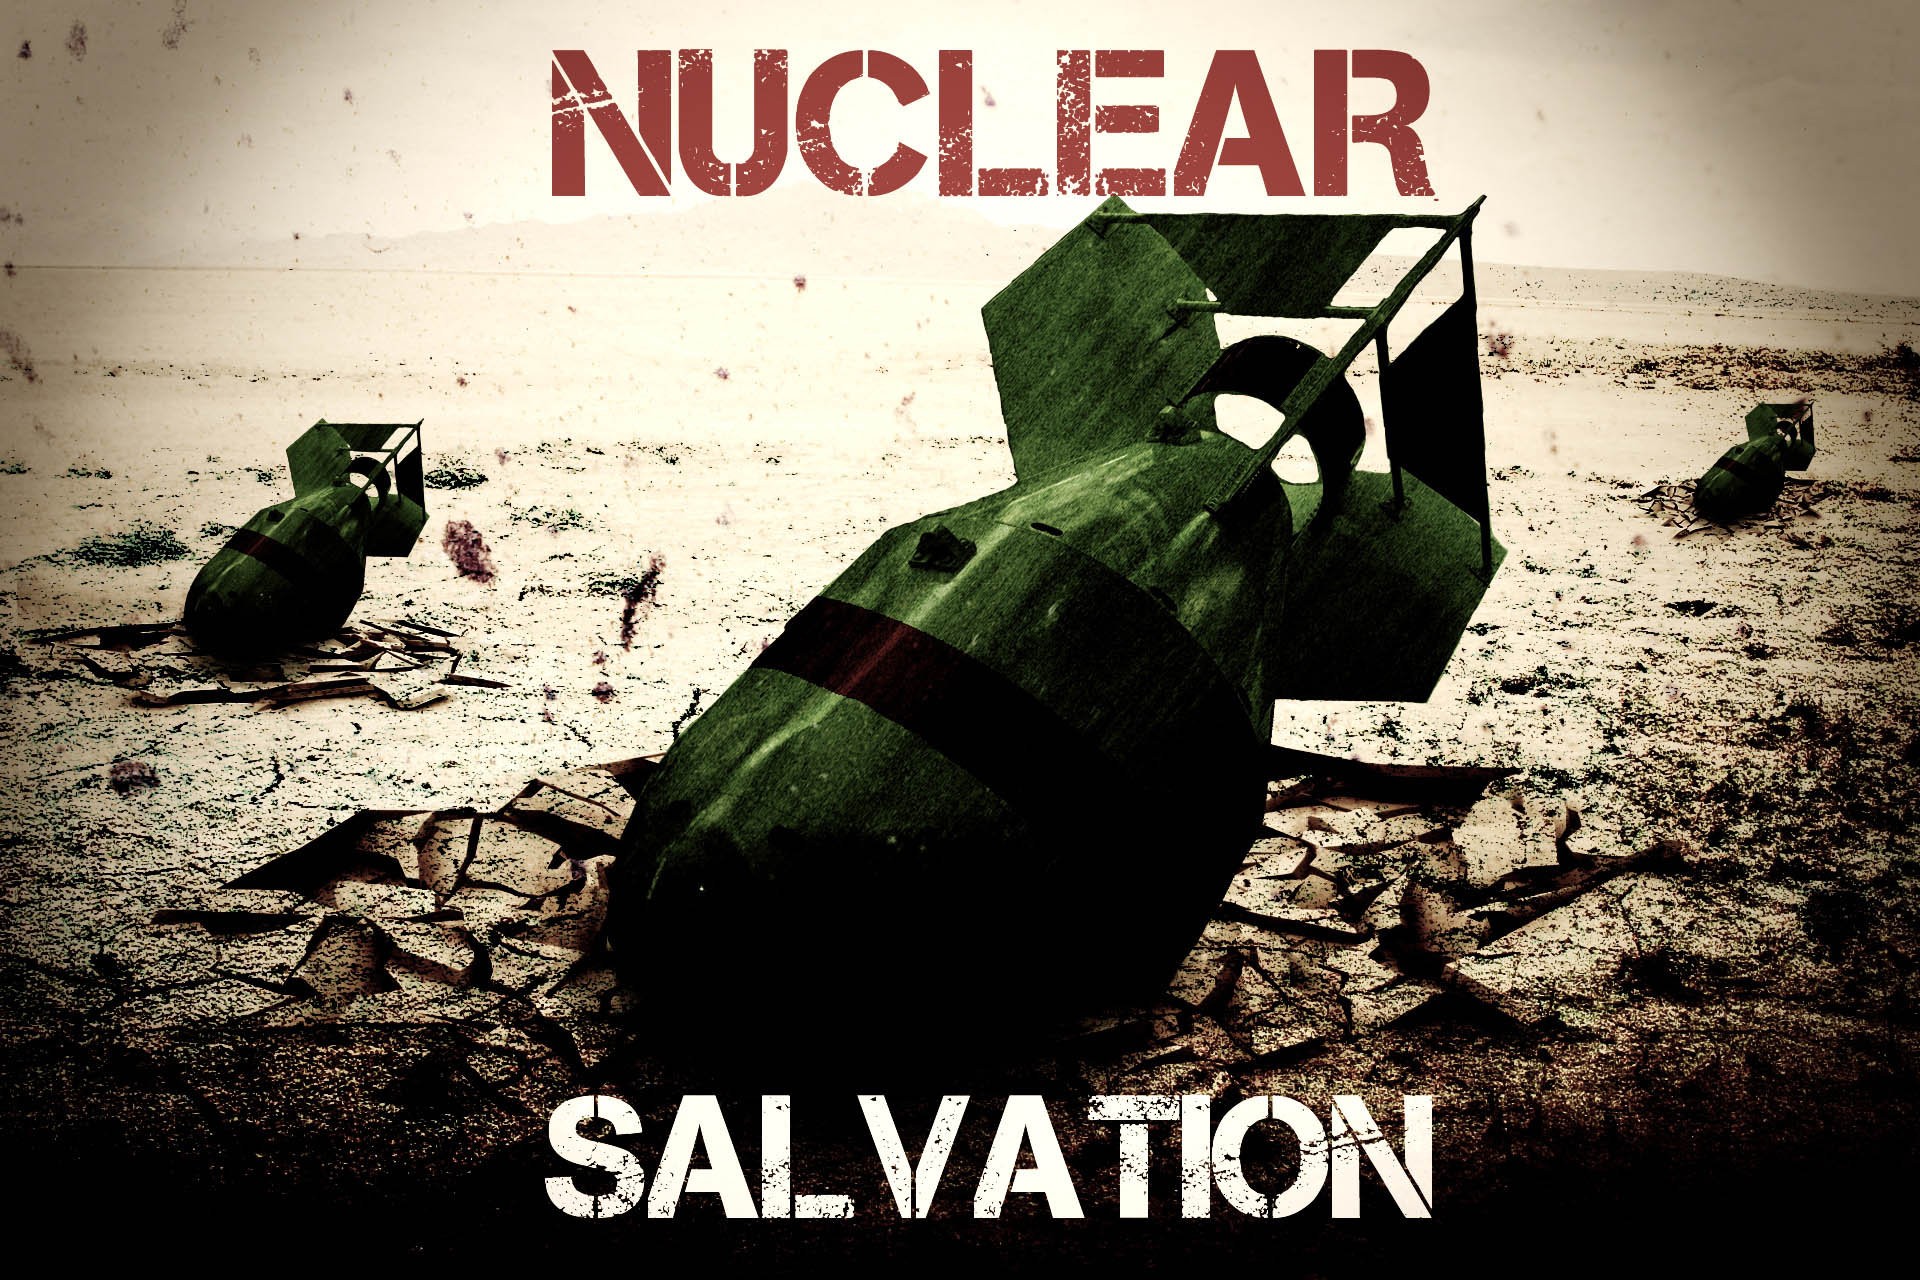 General 1920x1280 nuclear apocalyptic digital art bombs typography artwork